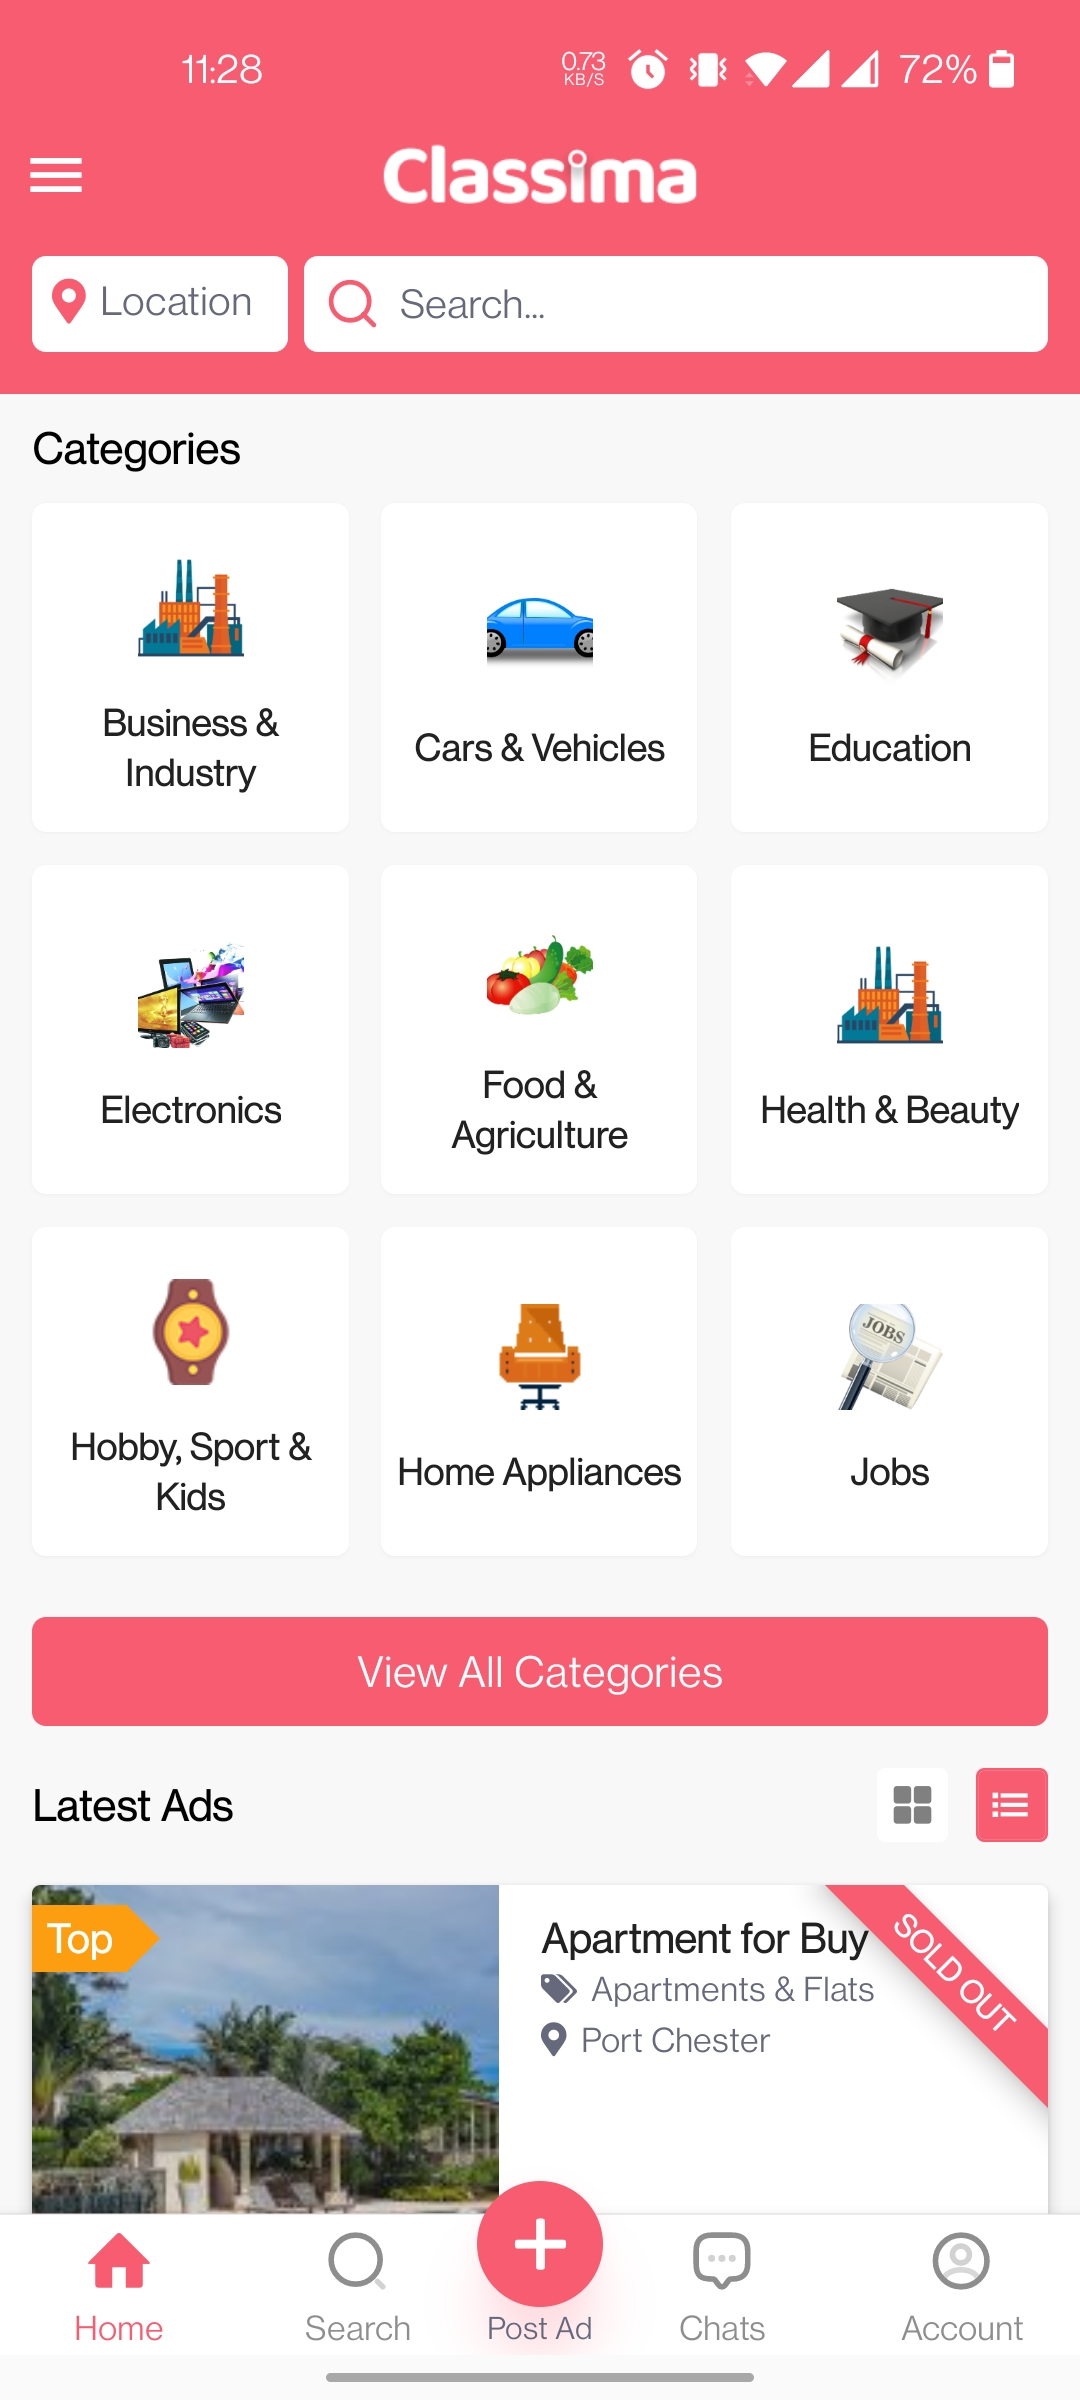 Classima Classified ads Android and iOS App